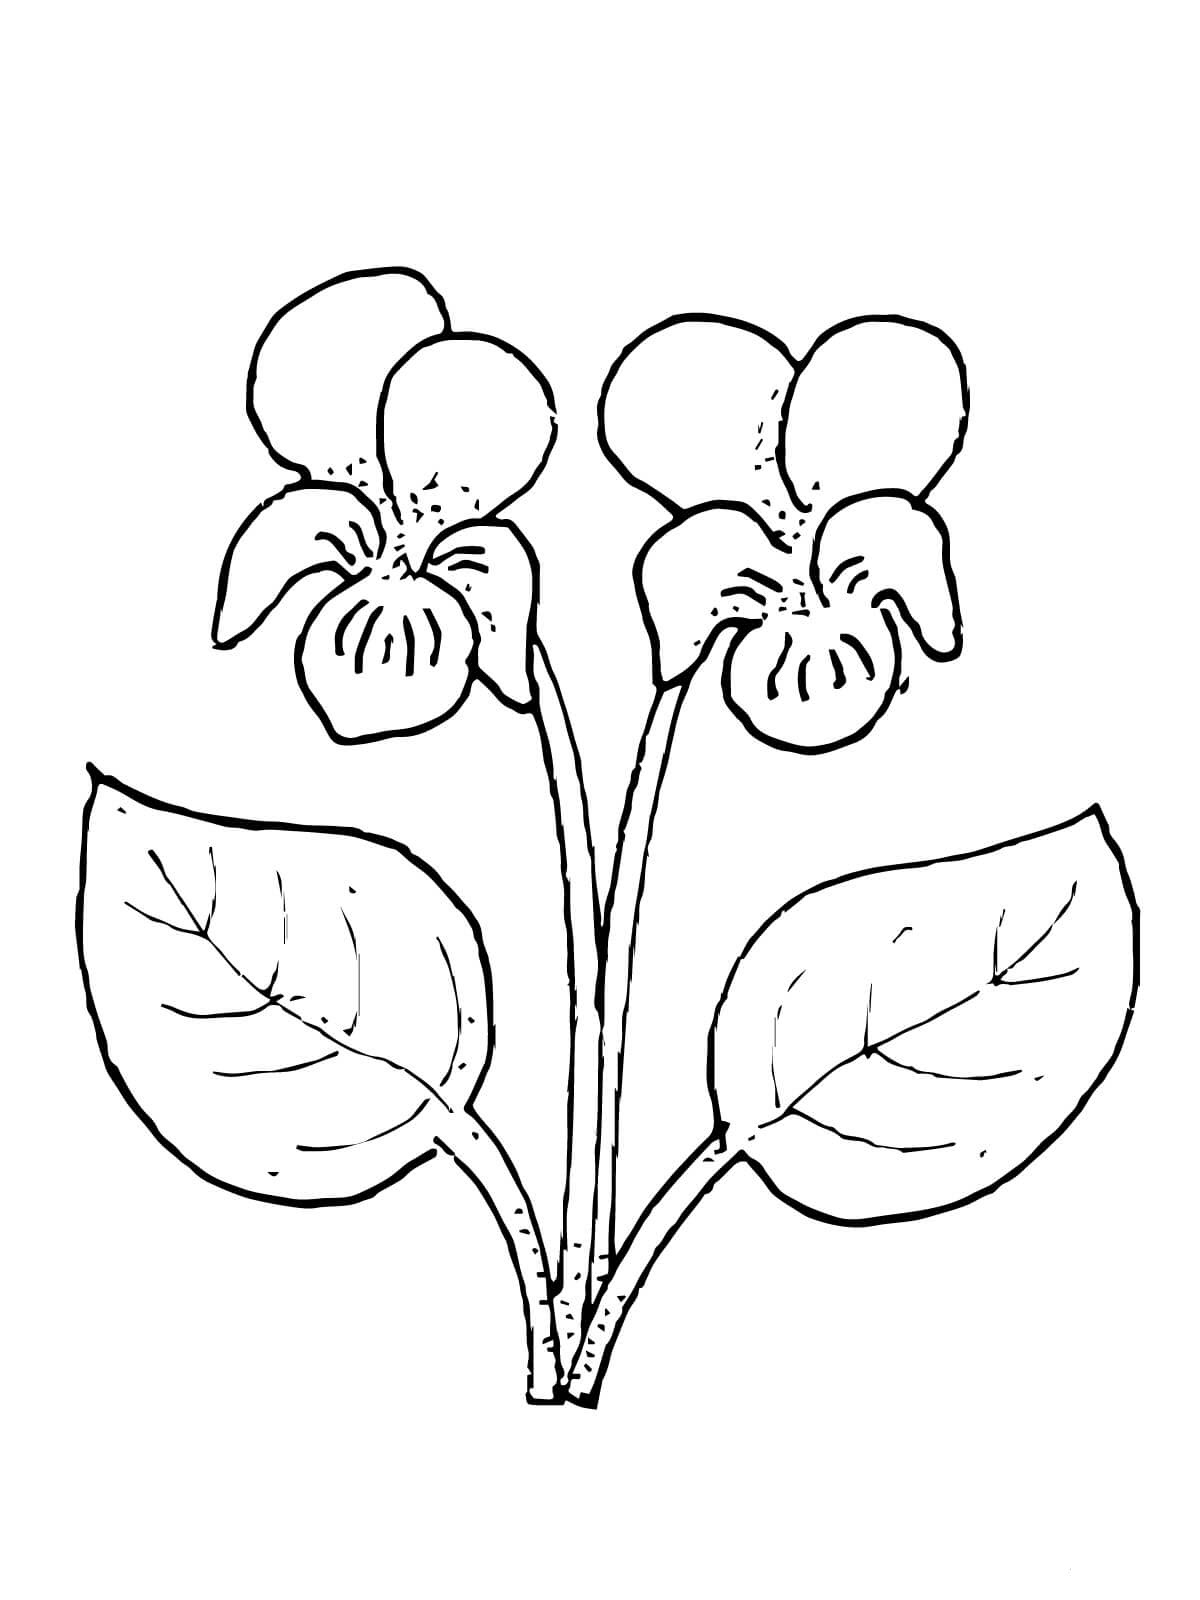 Coloring pictures of the most beautiful flowers